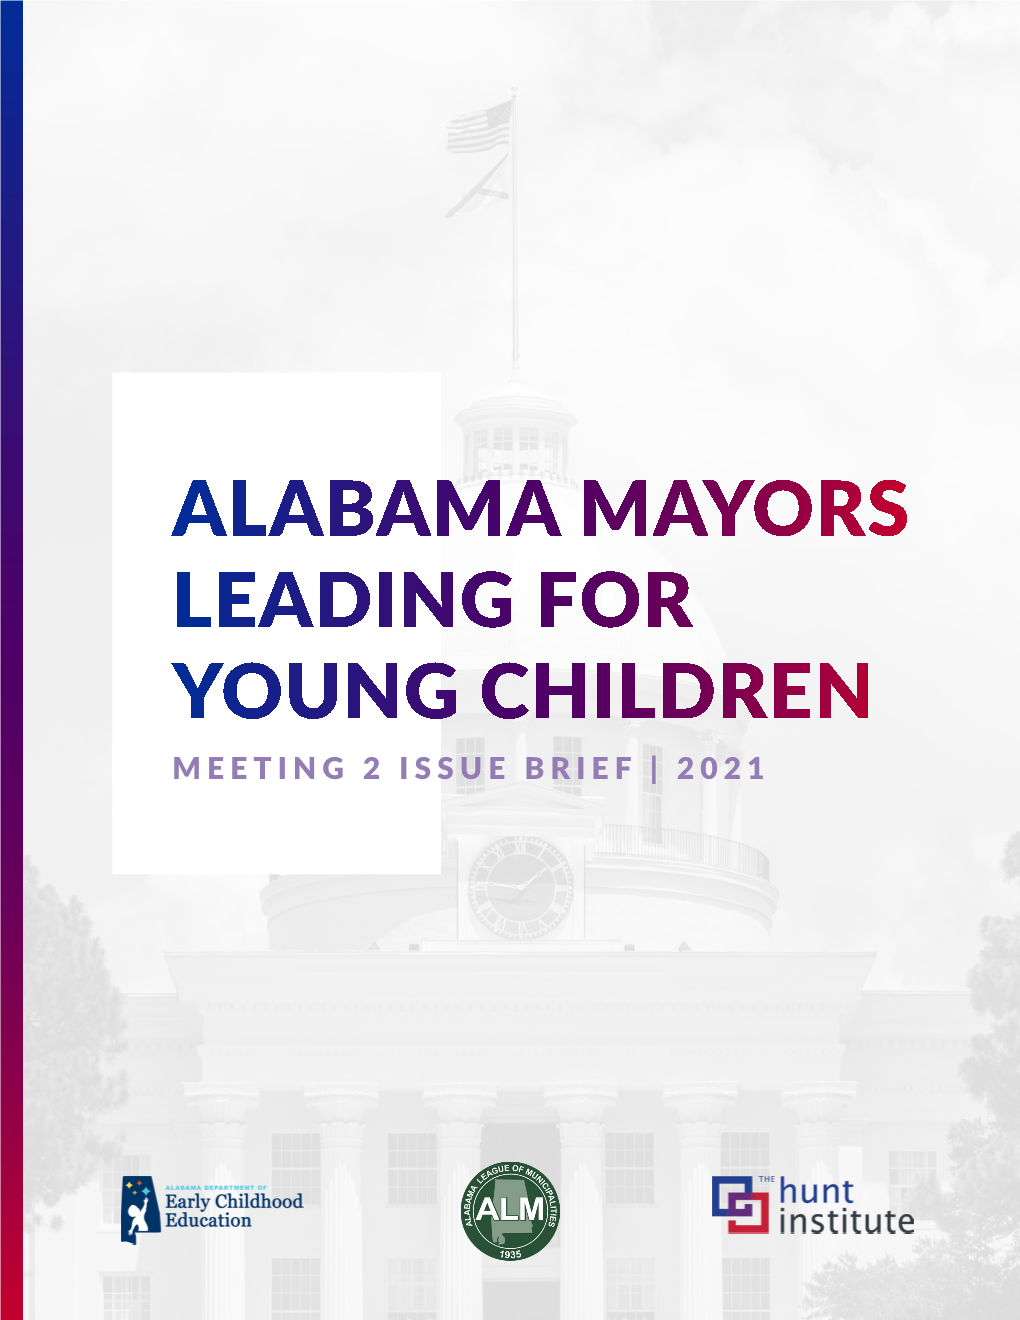 Alabama Mayors Leading for Young Children Meeting 2 Issue Brief | 2021 Alabama Mayors Leading for Young Children